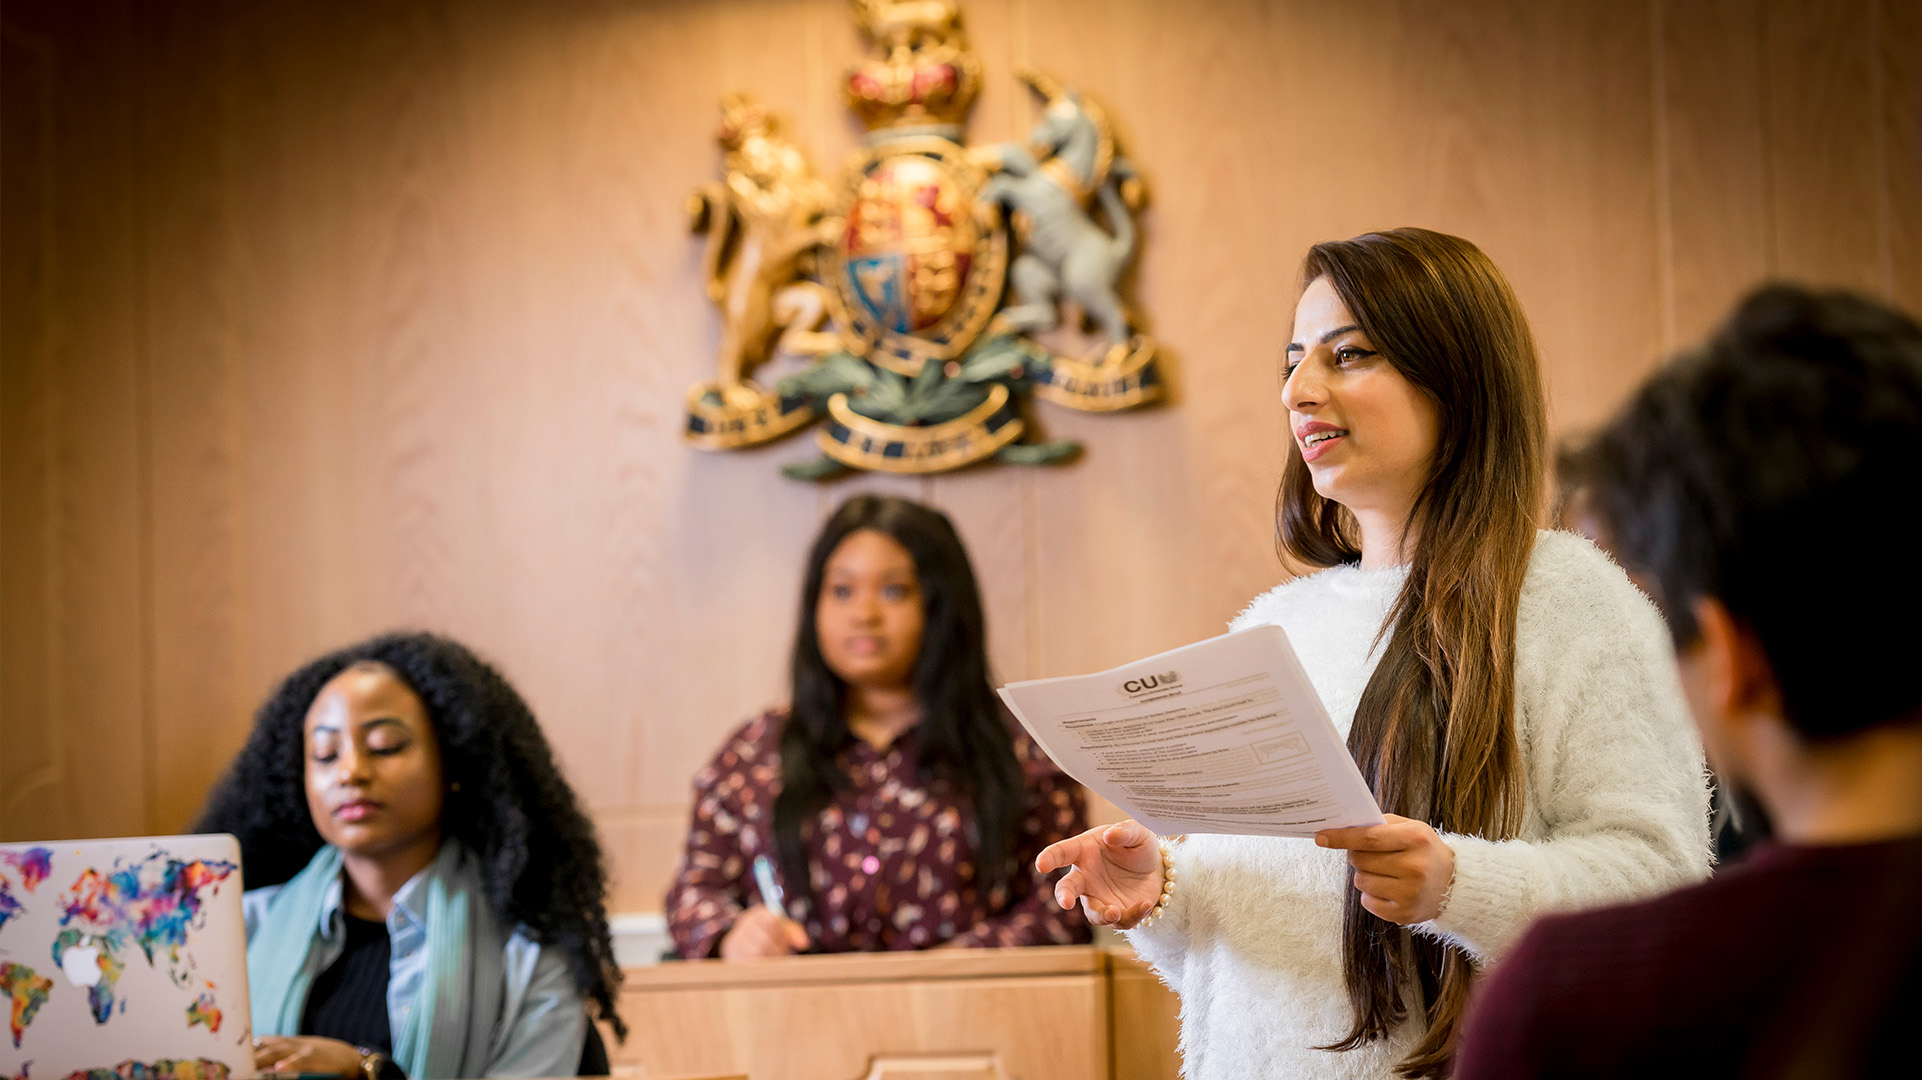 Students in the moot courtroom